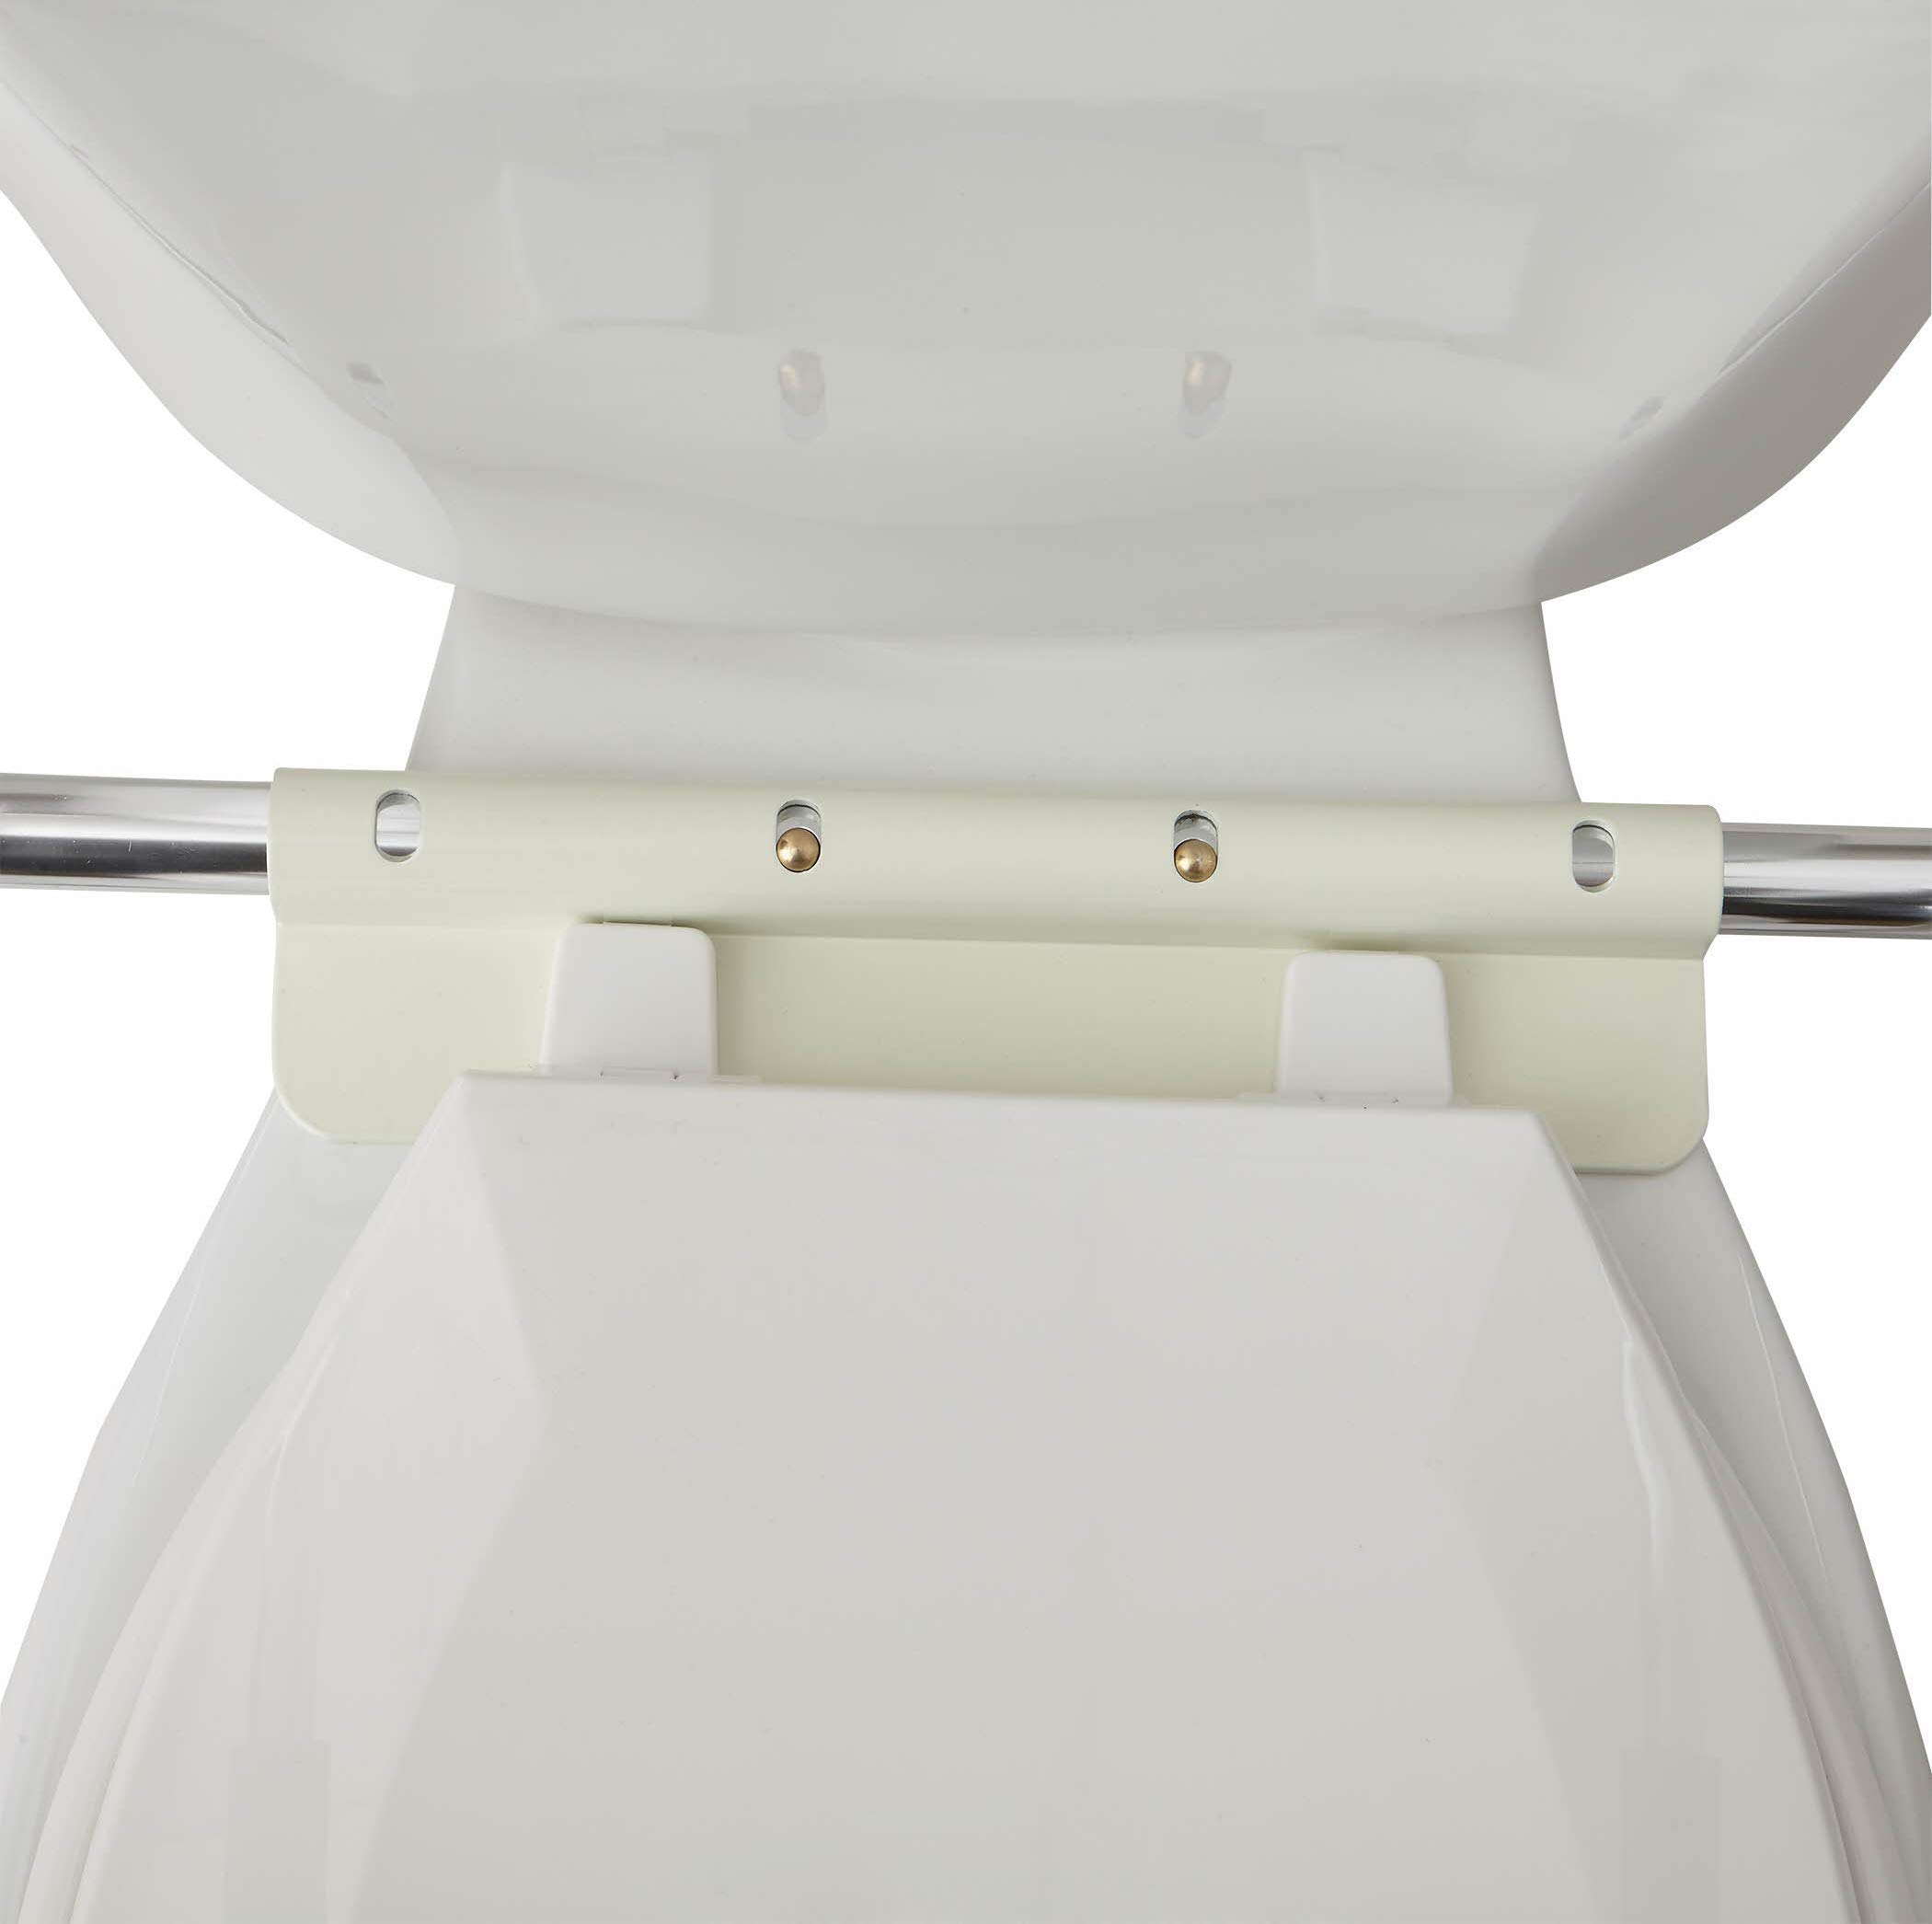 Medline's Guardian Toilet Safety Rail with Adjustable Height for Bathroom Safety, Toilet Assist, and Grab Bar (G30300H)